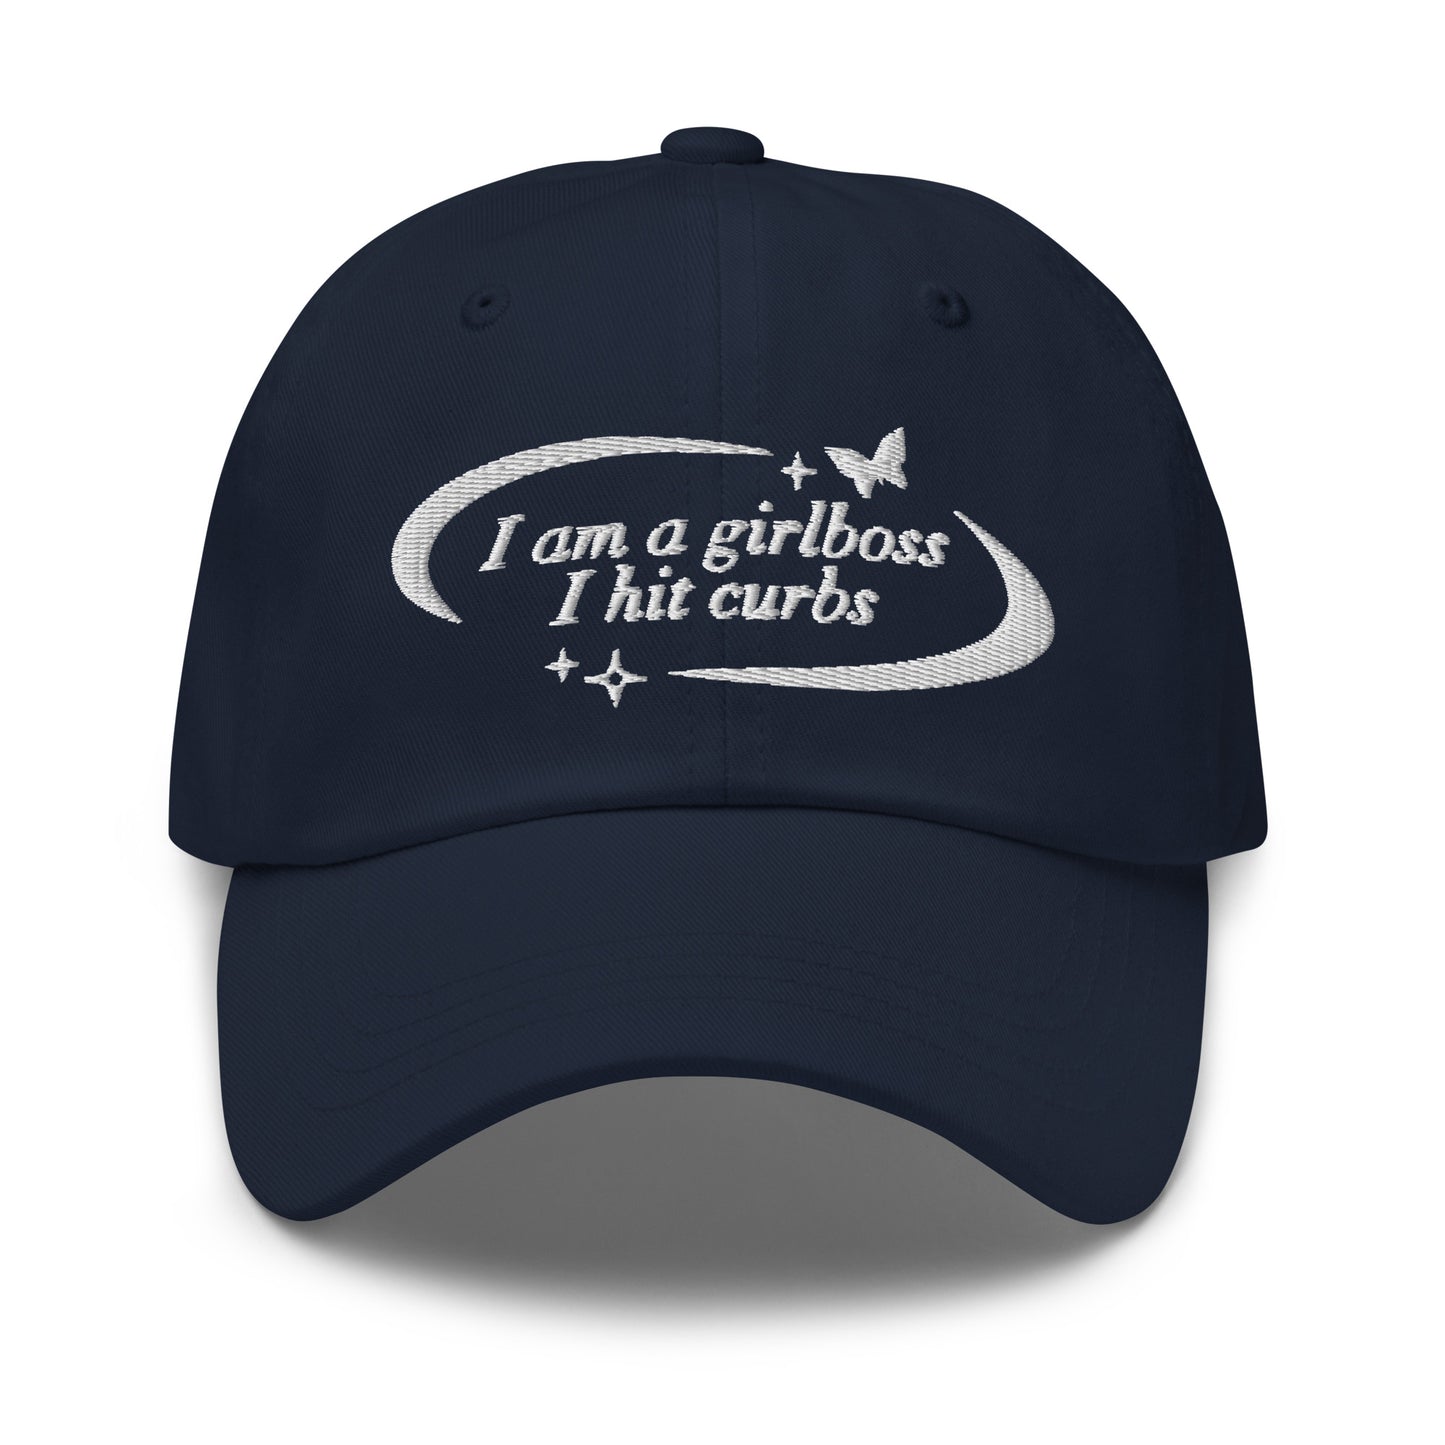 Girlboss I Hit Curbs (Embroidered) hat